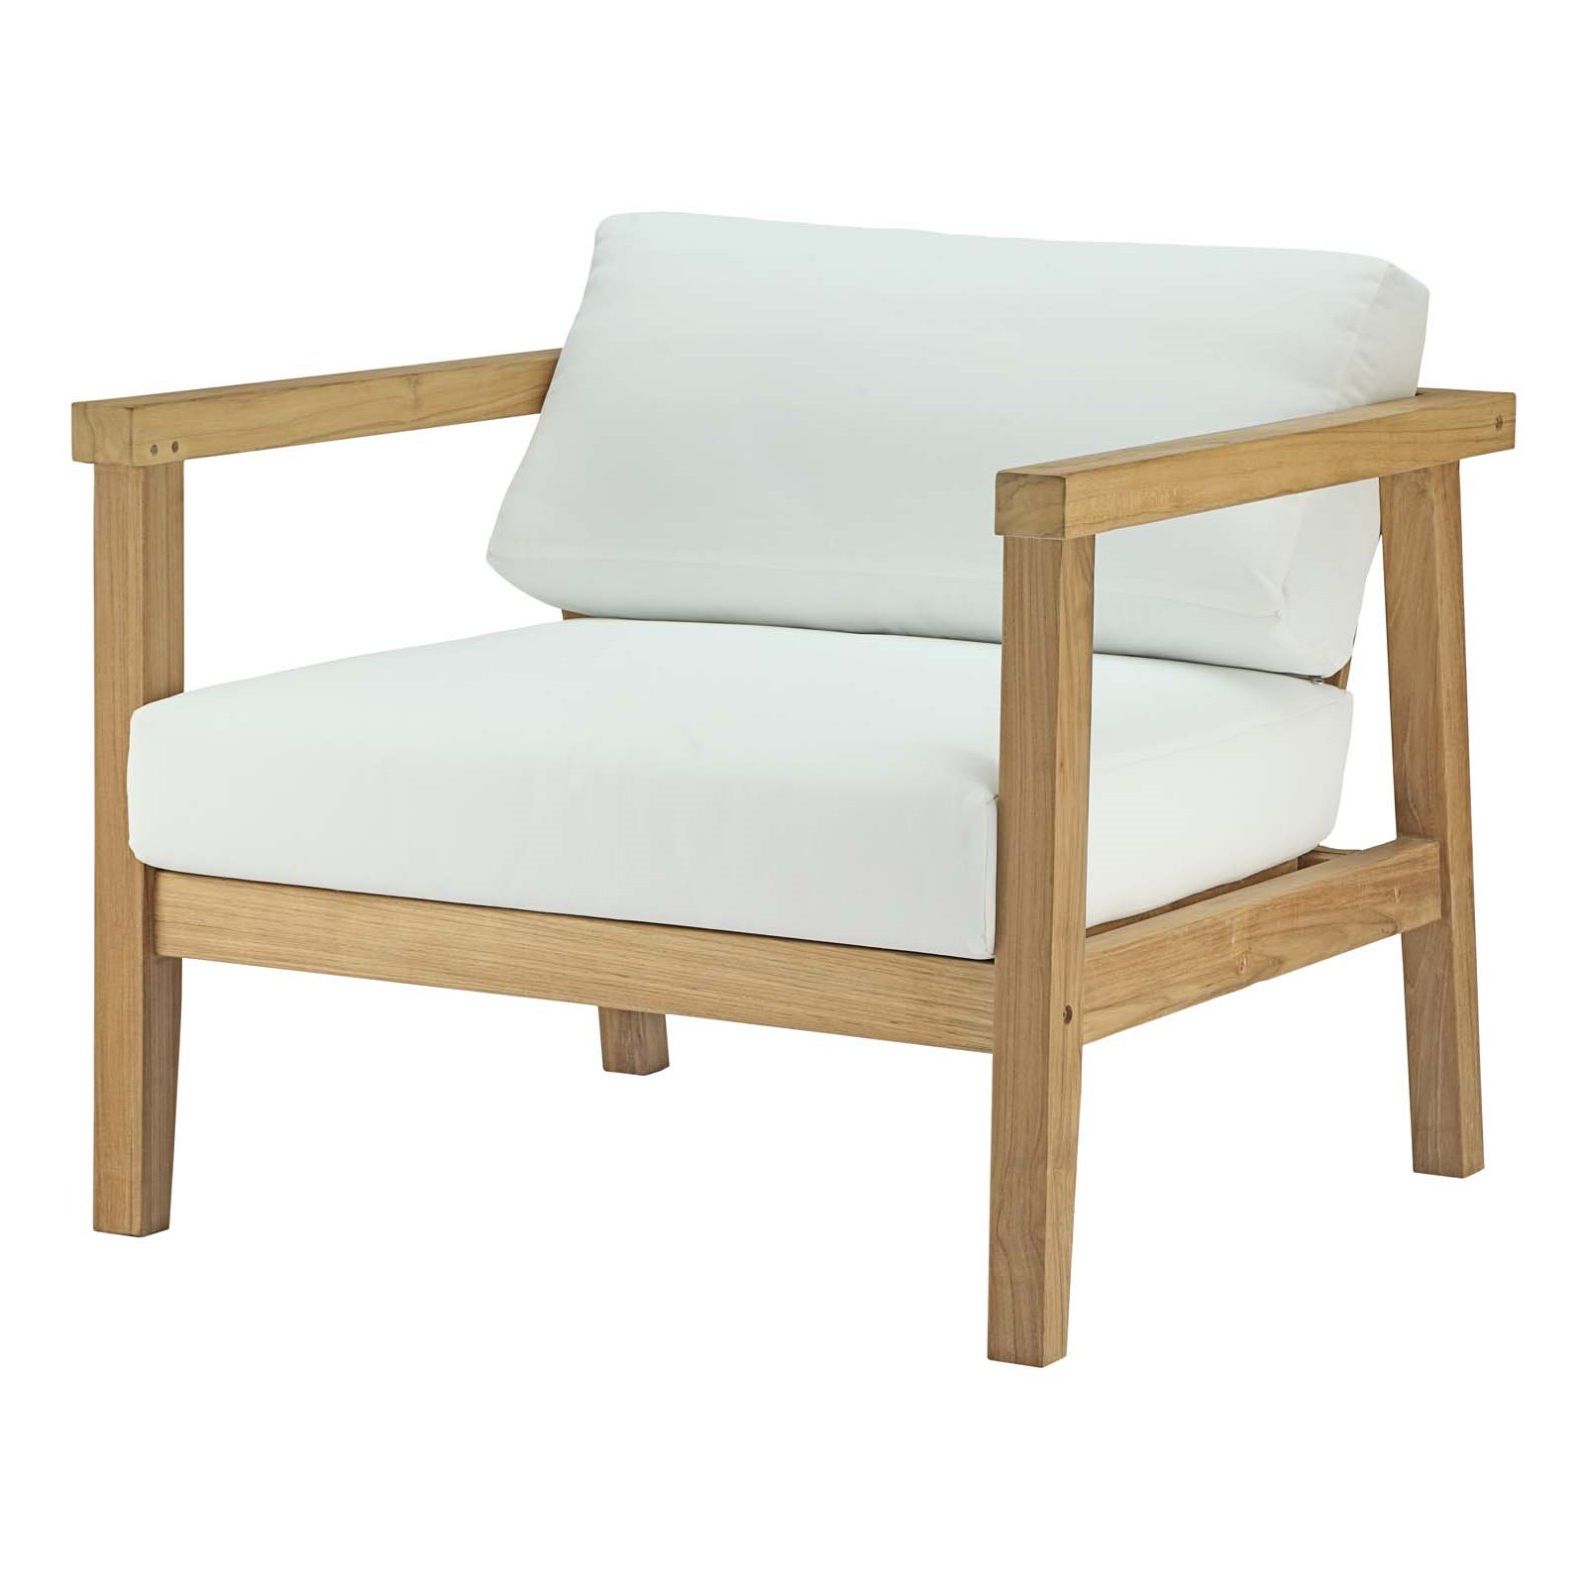 Widely Used Natural Wood Outdoor Lounger Chairs Throughout Modern Contemporary Urban Design Outdoor Patio Balcony Lounge Chair (View 10 of 15)